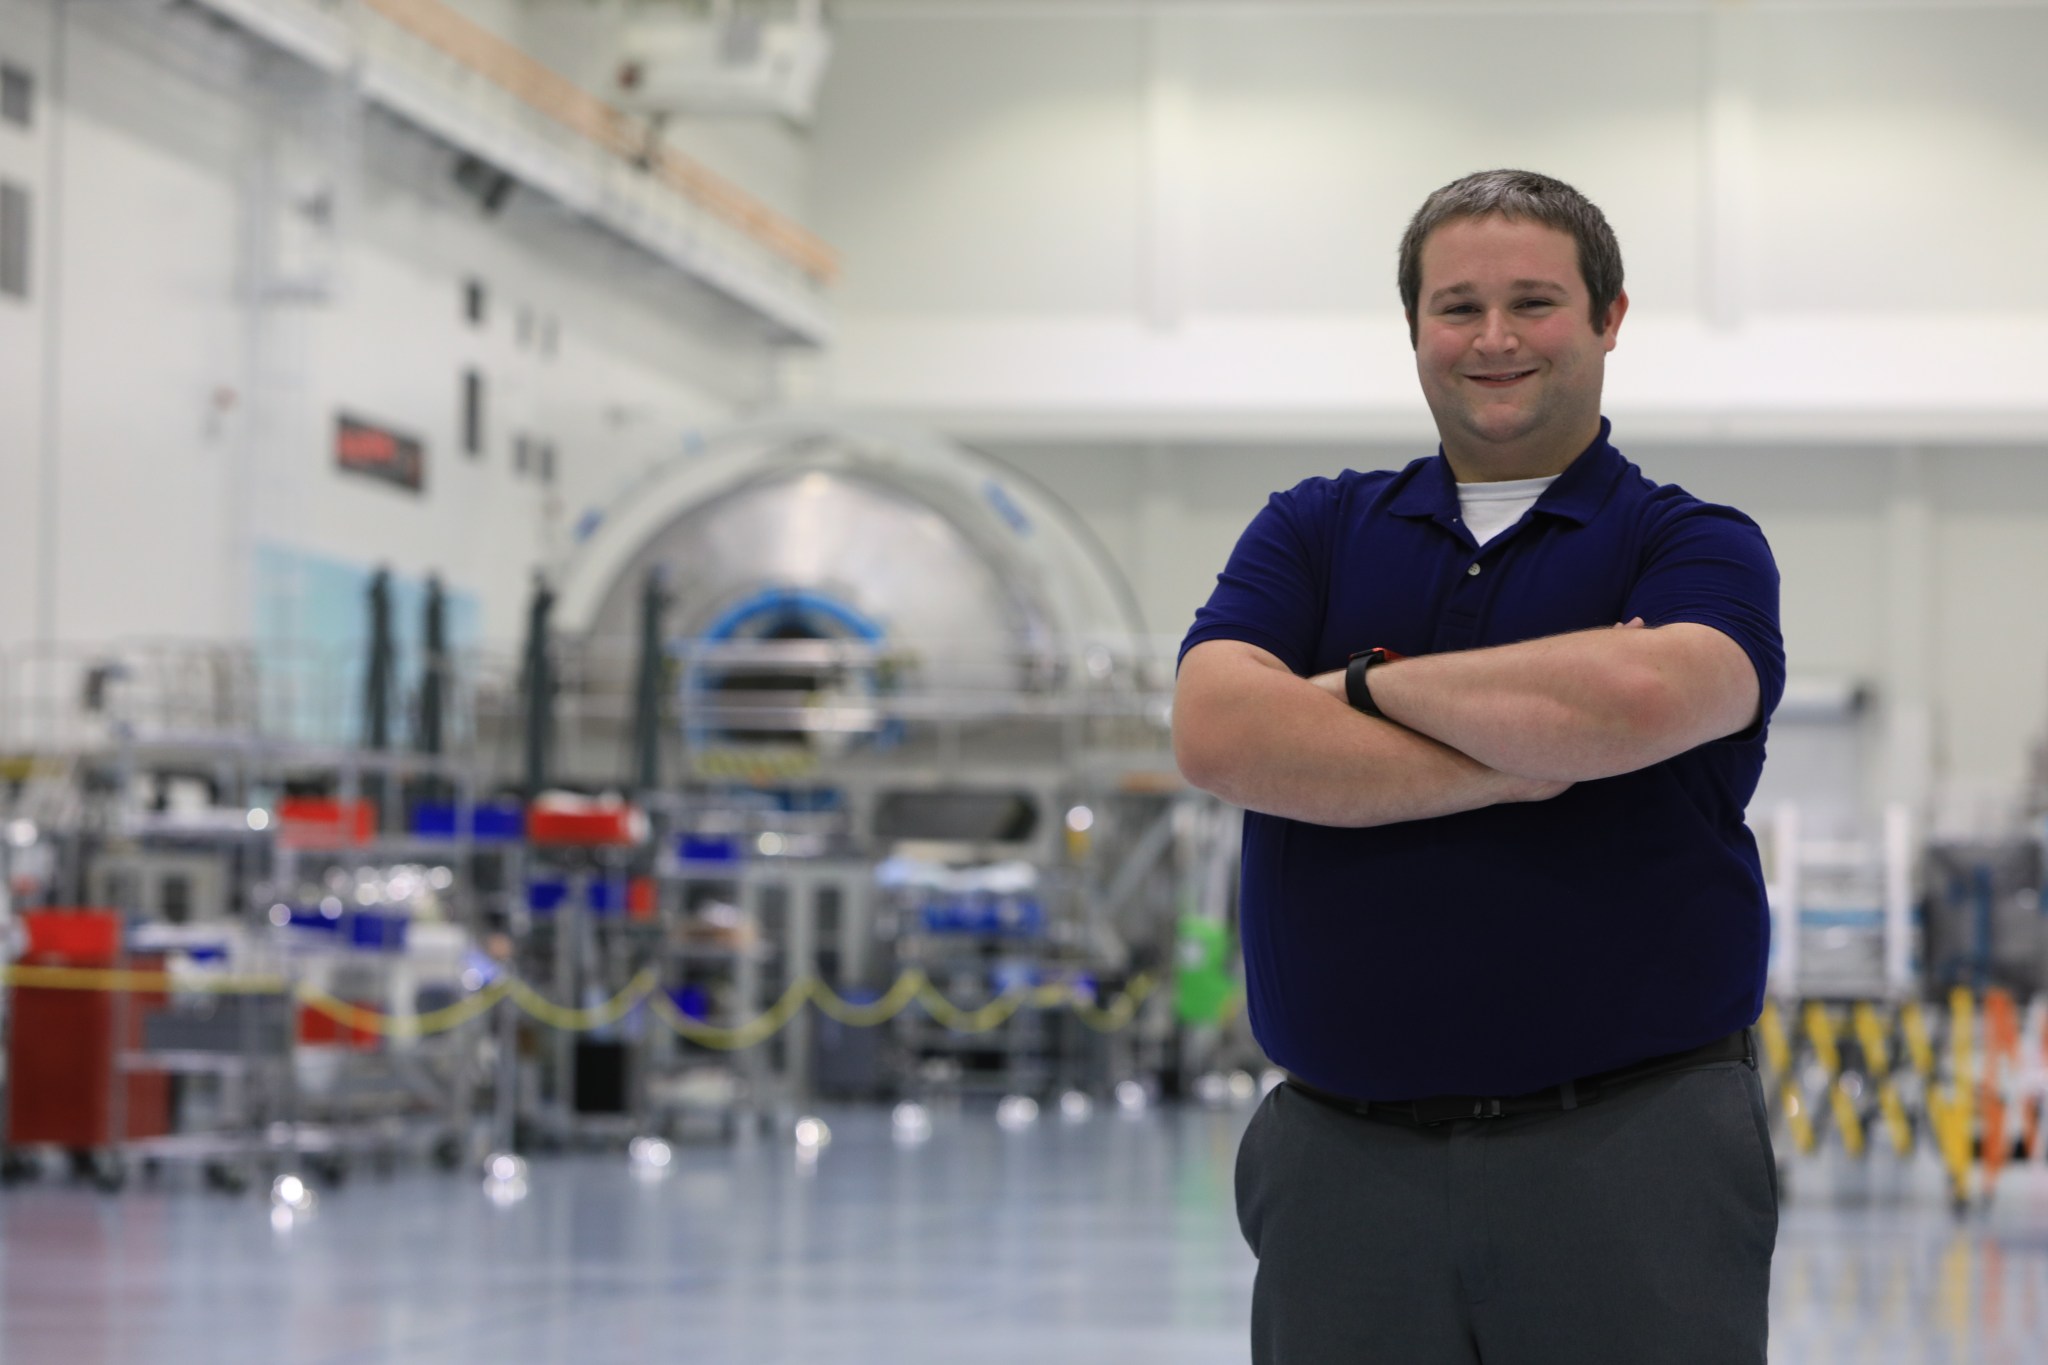 Ethan Christian, an operations engineer at NASA's Kennedy Space Center, helps keep the International Space Station flying.